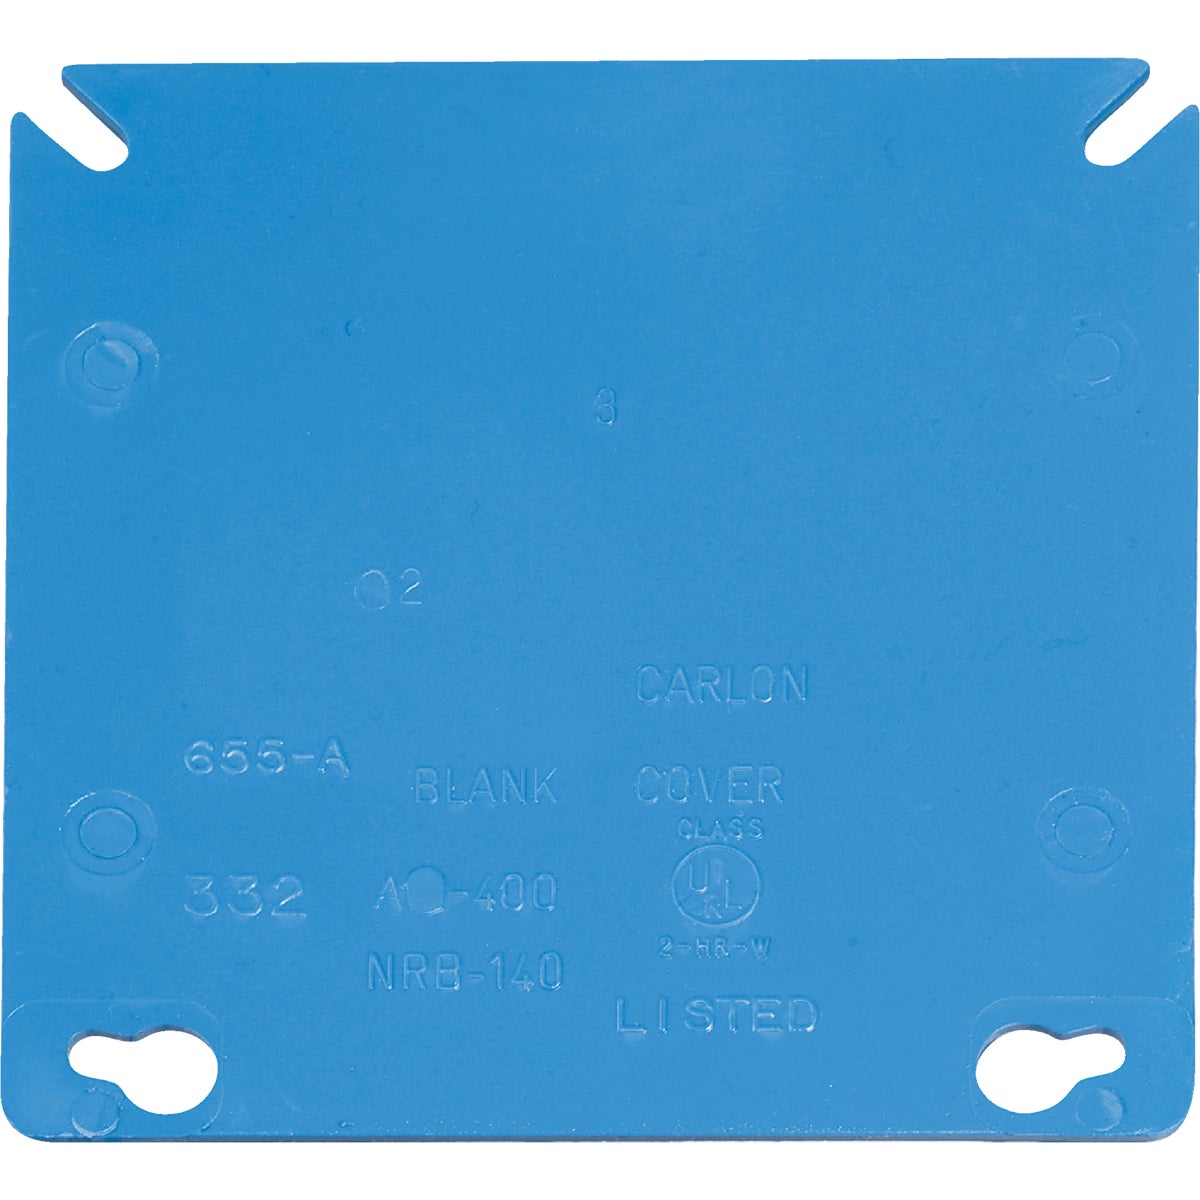 Item 510998, PVC construction, 4-inch square, 2-gang blank cover.